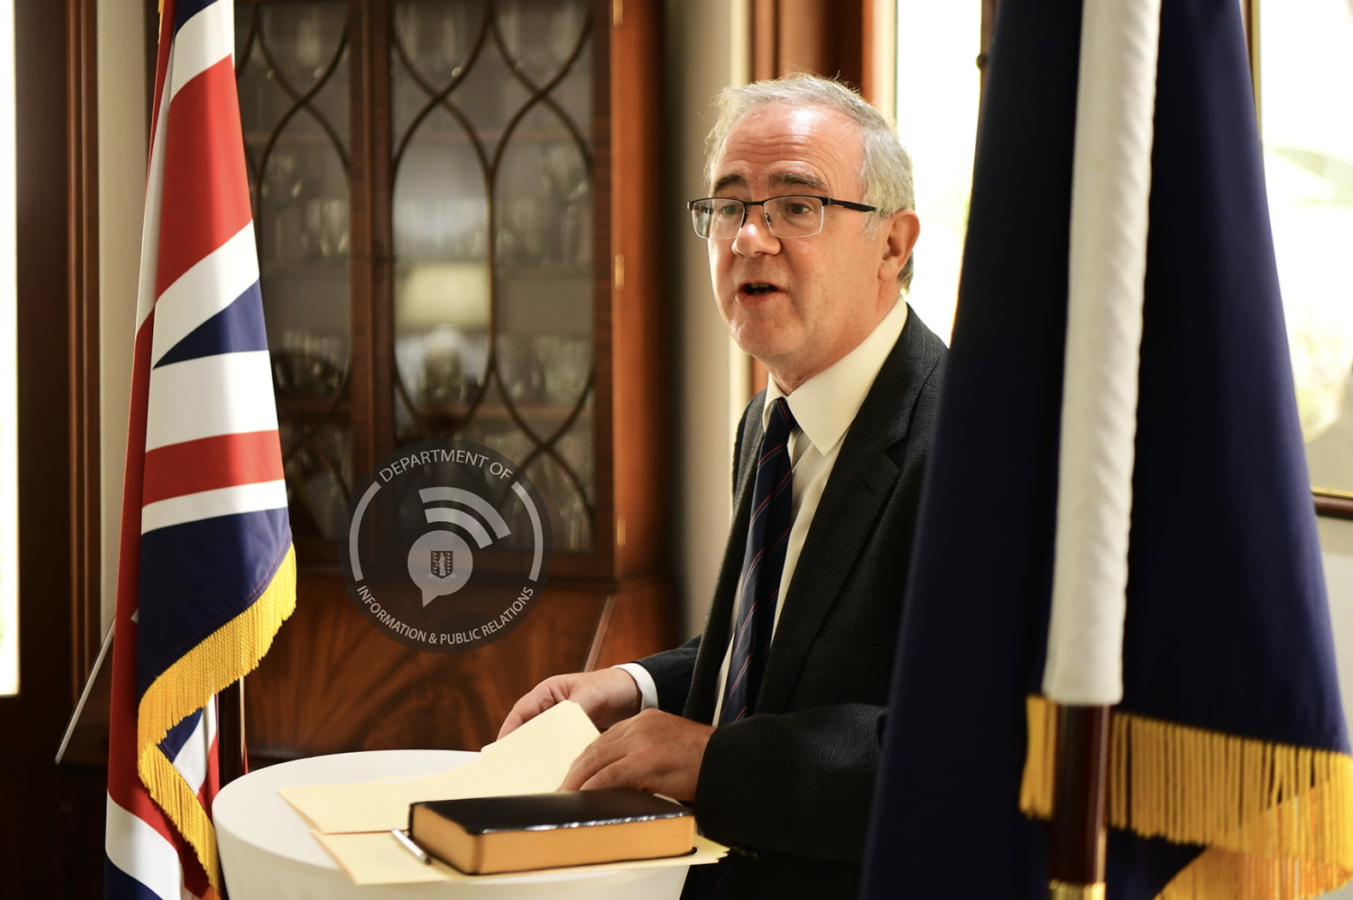 No single stakeholder group speaks for everyone in BVI - Governor